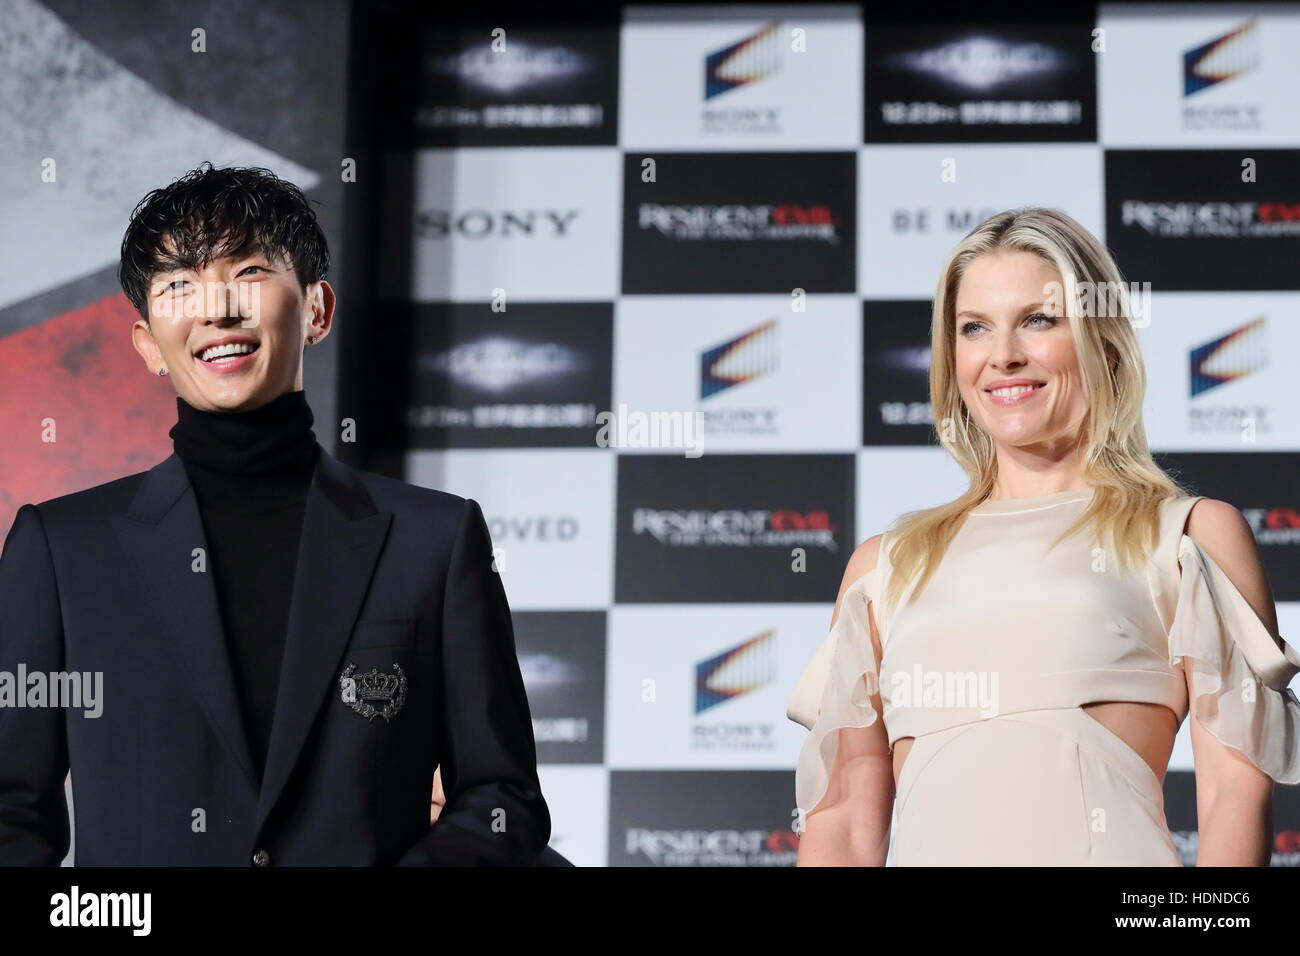 Actor Lee Joon-gi and actress Ali Larter attend the world premiere of the  film Resident